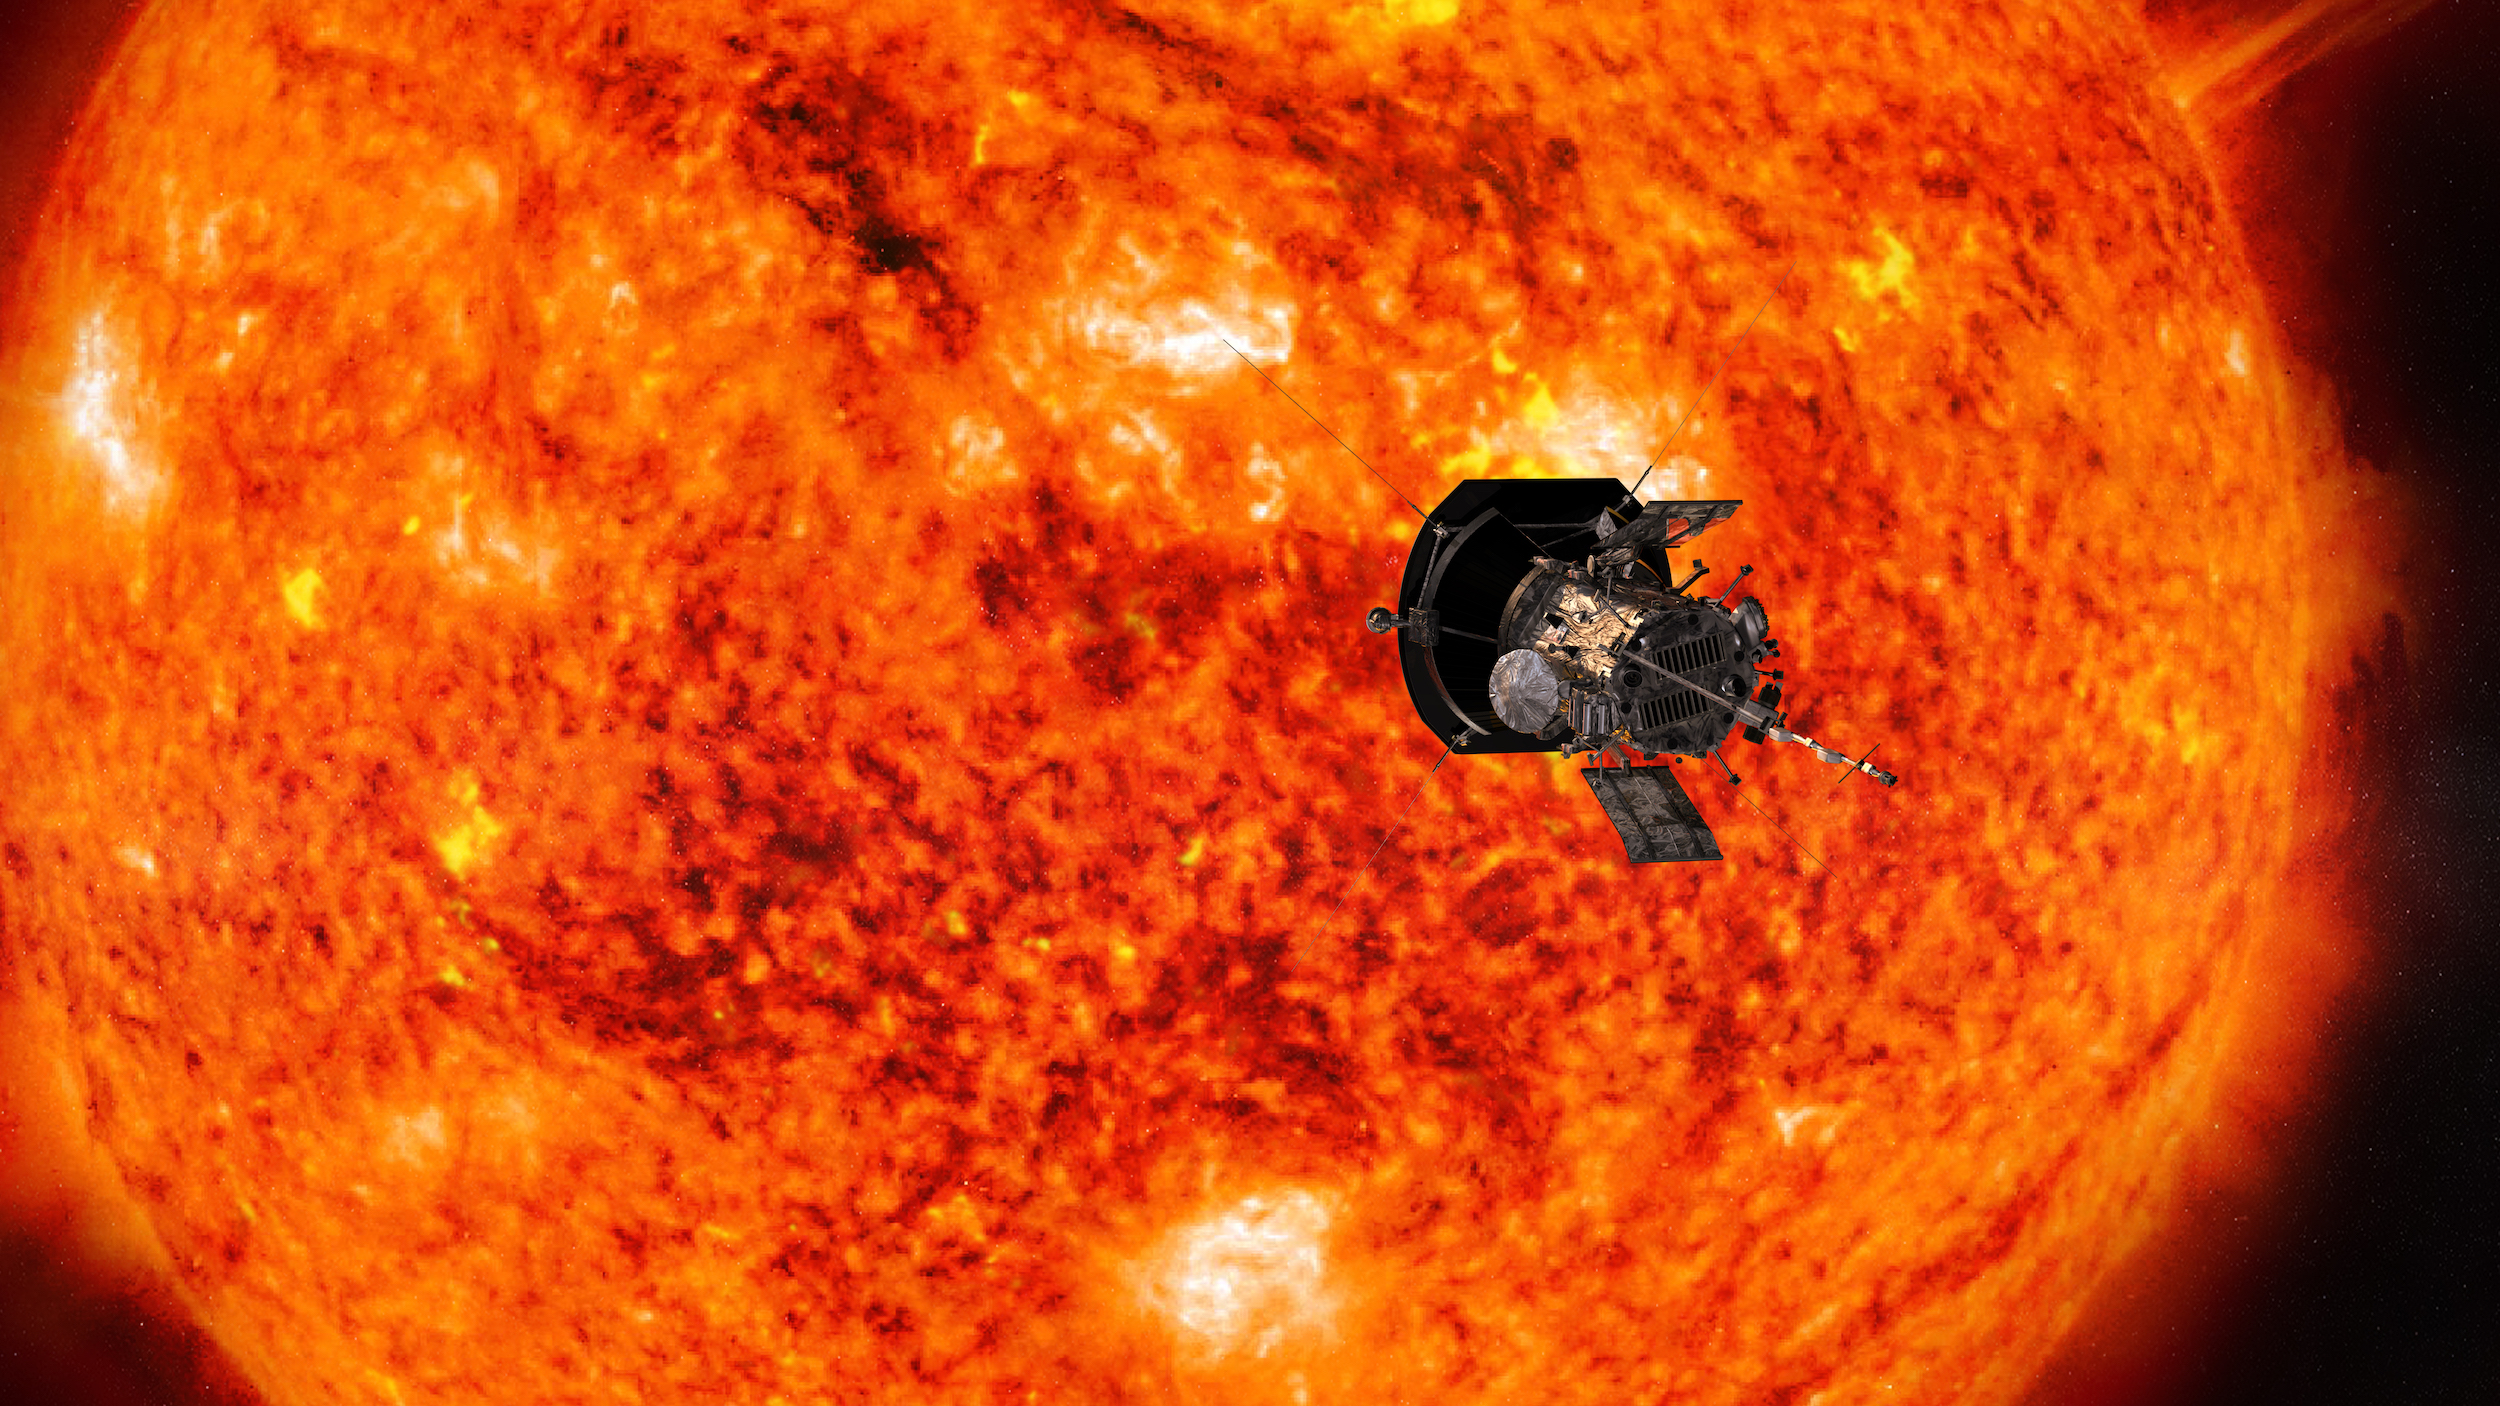 Driesman, Hill and Cooper oversaw the APL team responsible for designing and building the spacecraft and key technologies enabling the mission for NASA, including the protective heat shield that maintains the spacecraft’s temperature; a cooling system for the spacecraft’s solar arrays; and autonomous systems that adjust the heat shield’s alignment as it passes around the Sun. APL continues to operate Parker Solar Probe, which launched on Aug. 12, 2018.